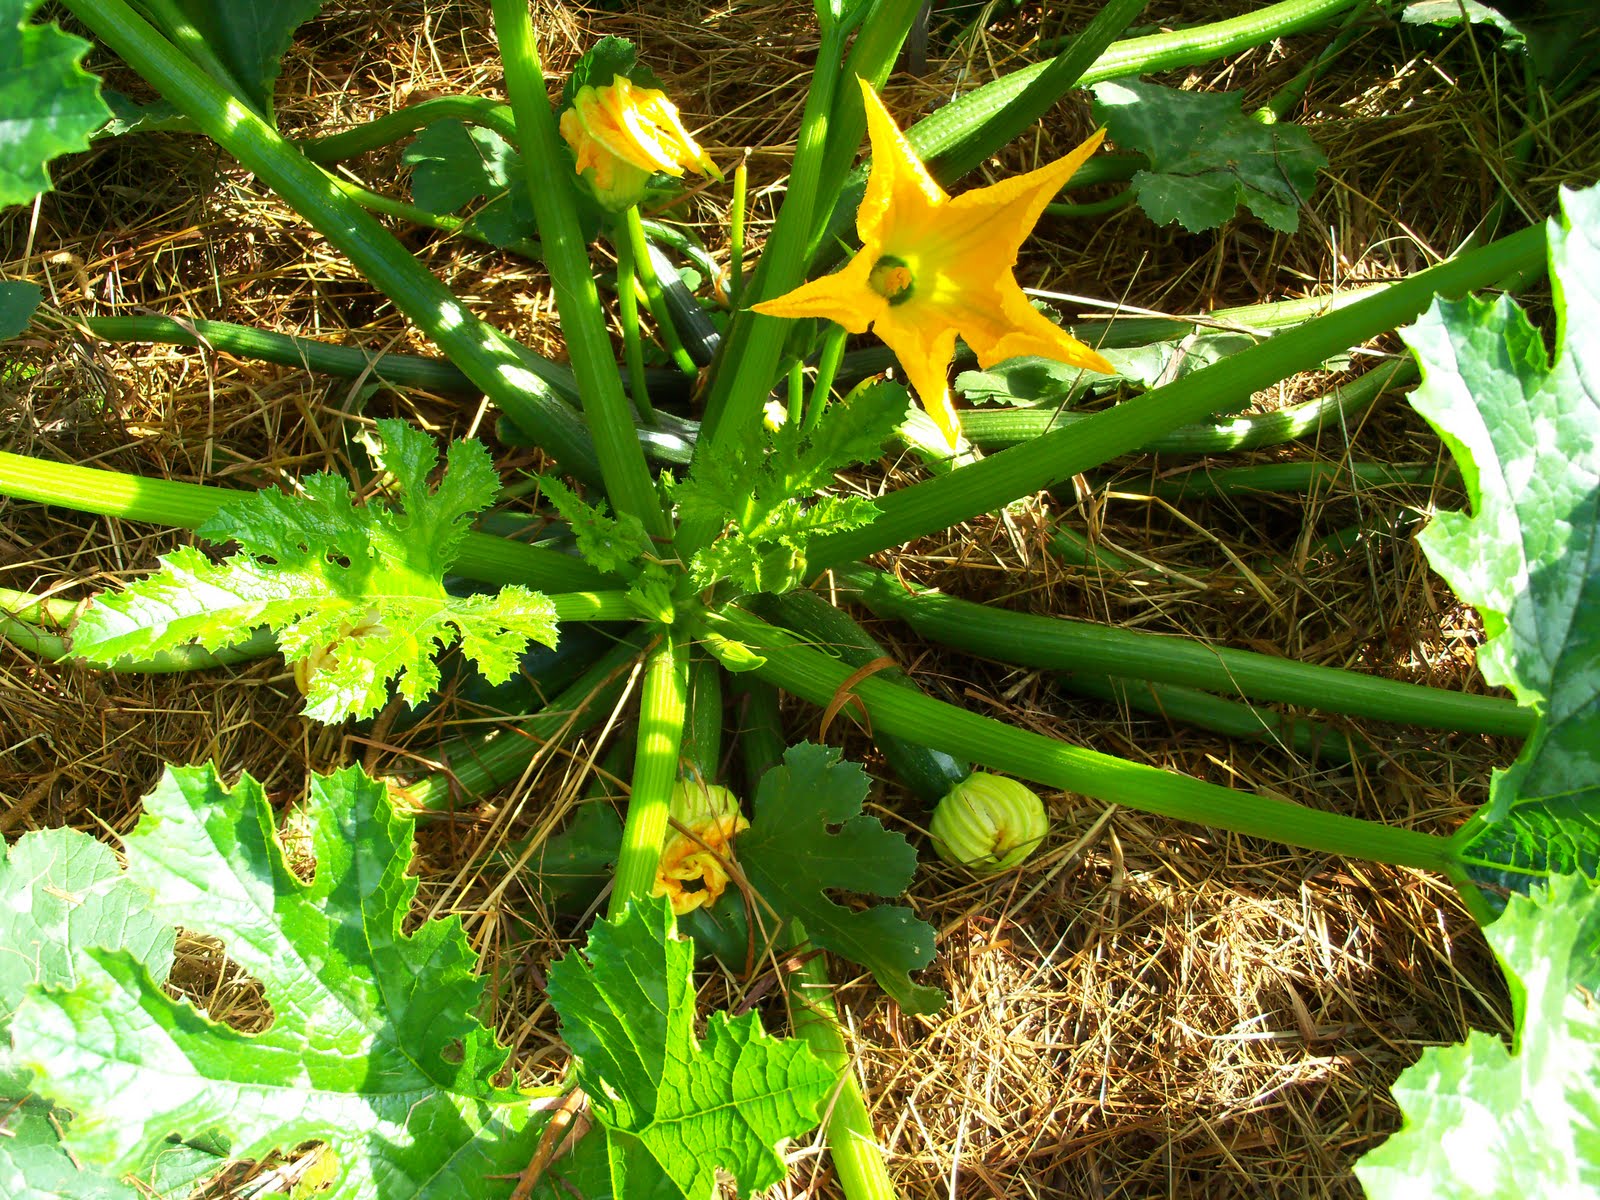 Zucchini Growth Stages: How Fast Does Zucchini Grow? 4